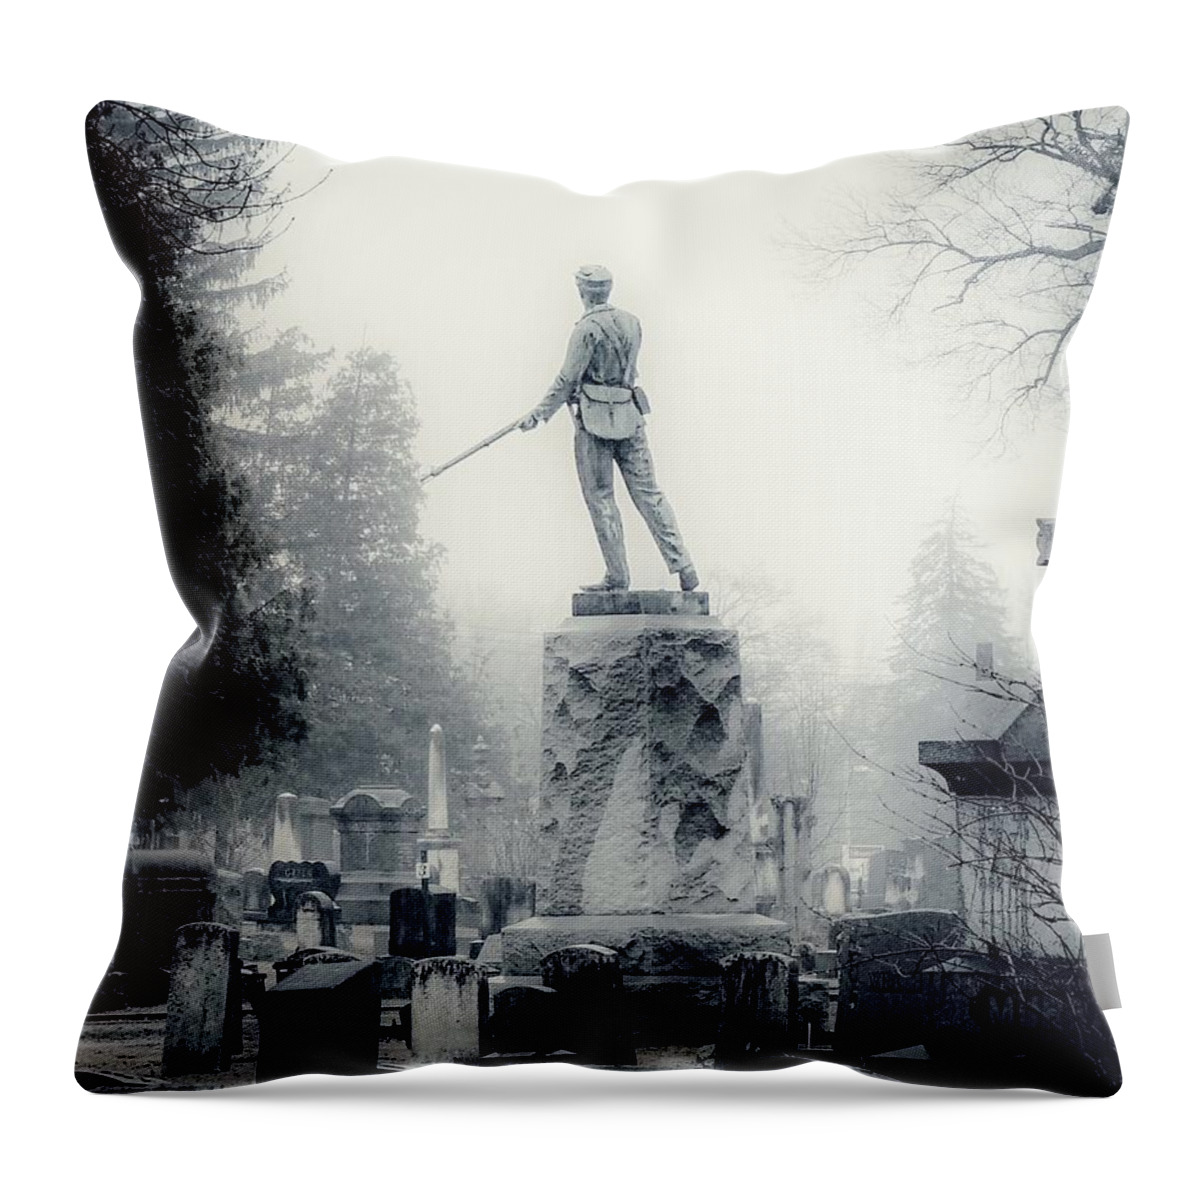  Throw Pillow featuring the photograph Guardian by Kendall McKernon